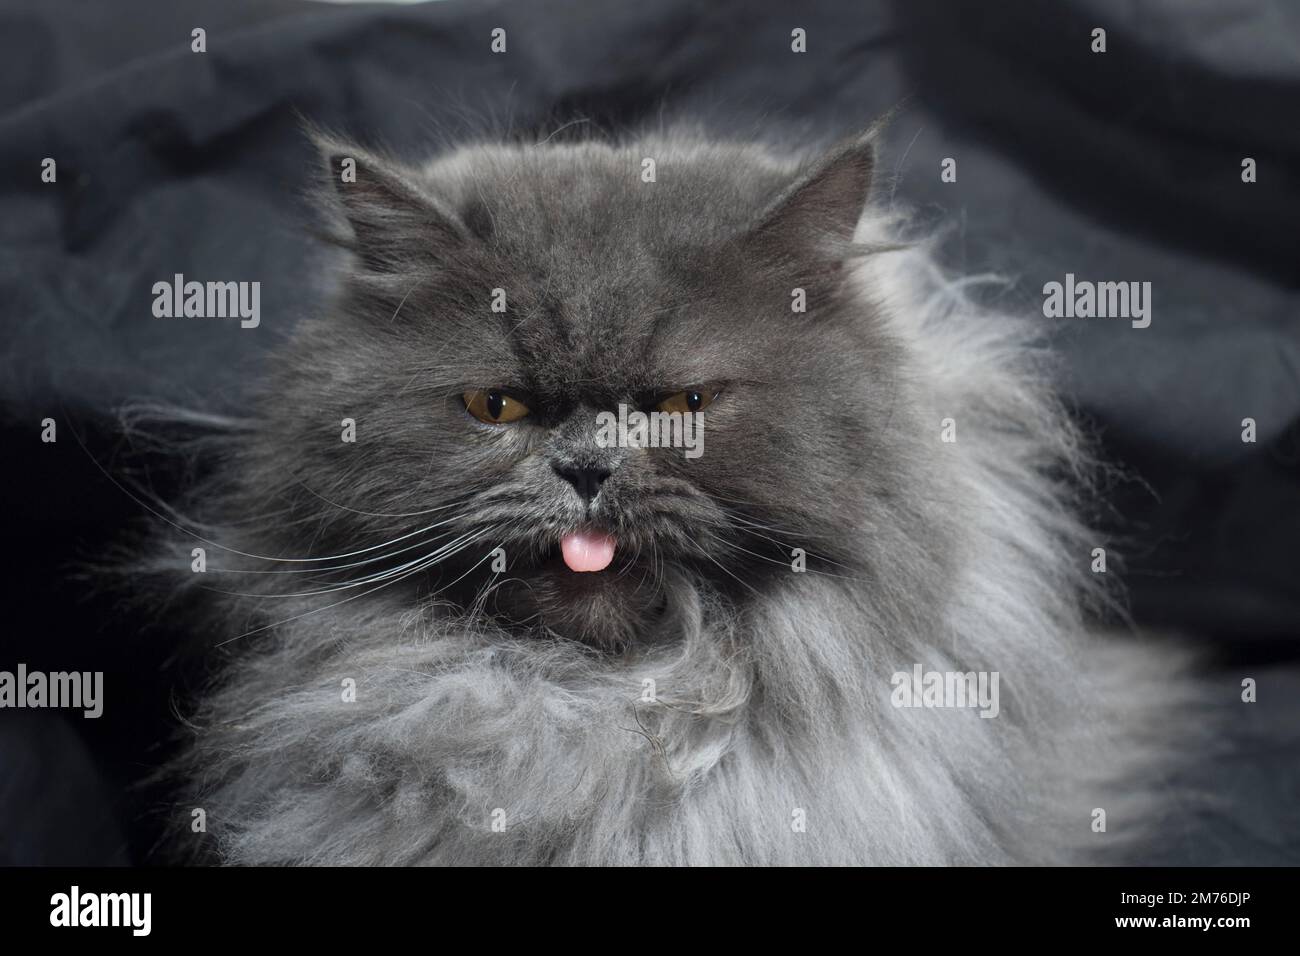 Funny portrait of a fluffy grey cat sticking his tongue out looking grumpy. Stock Photo